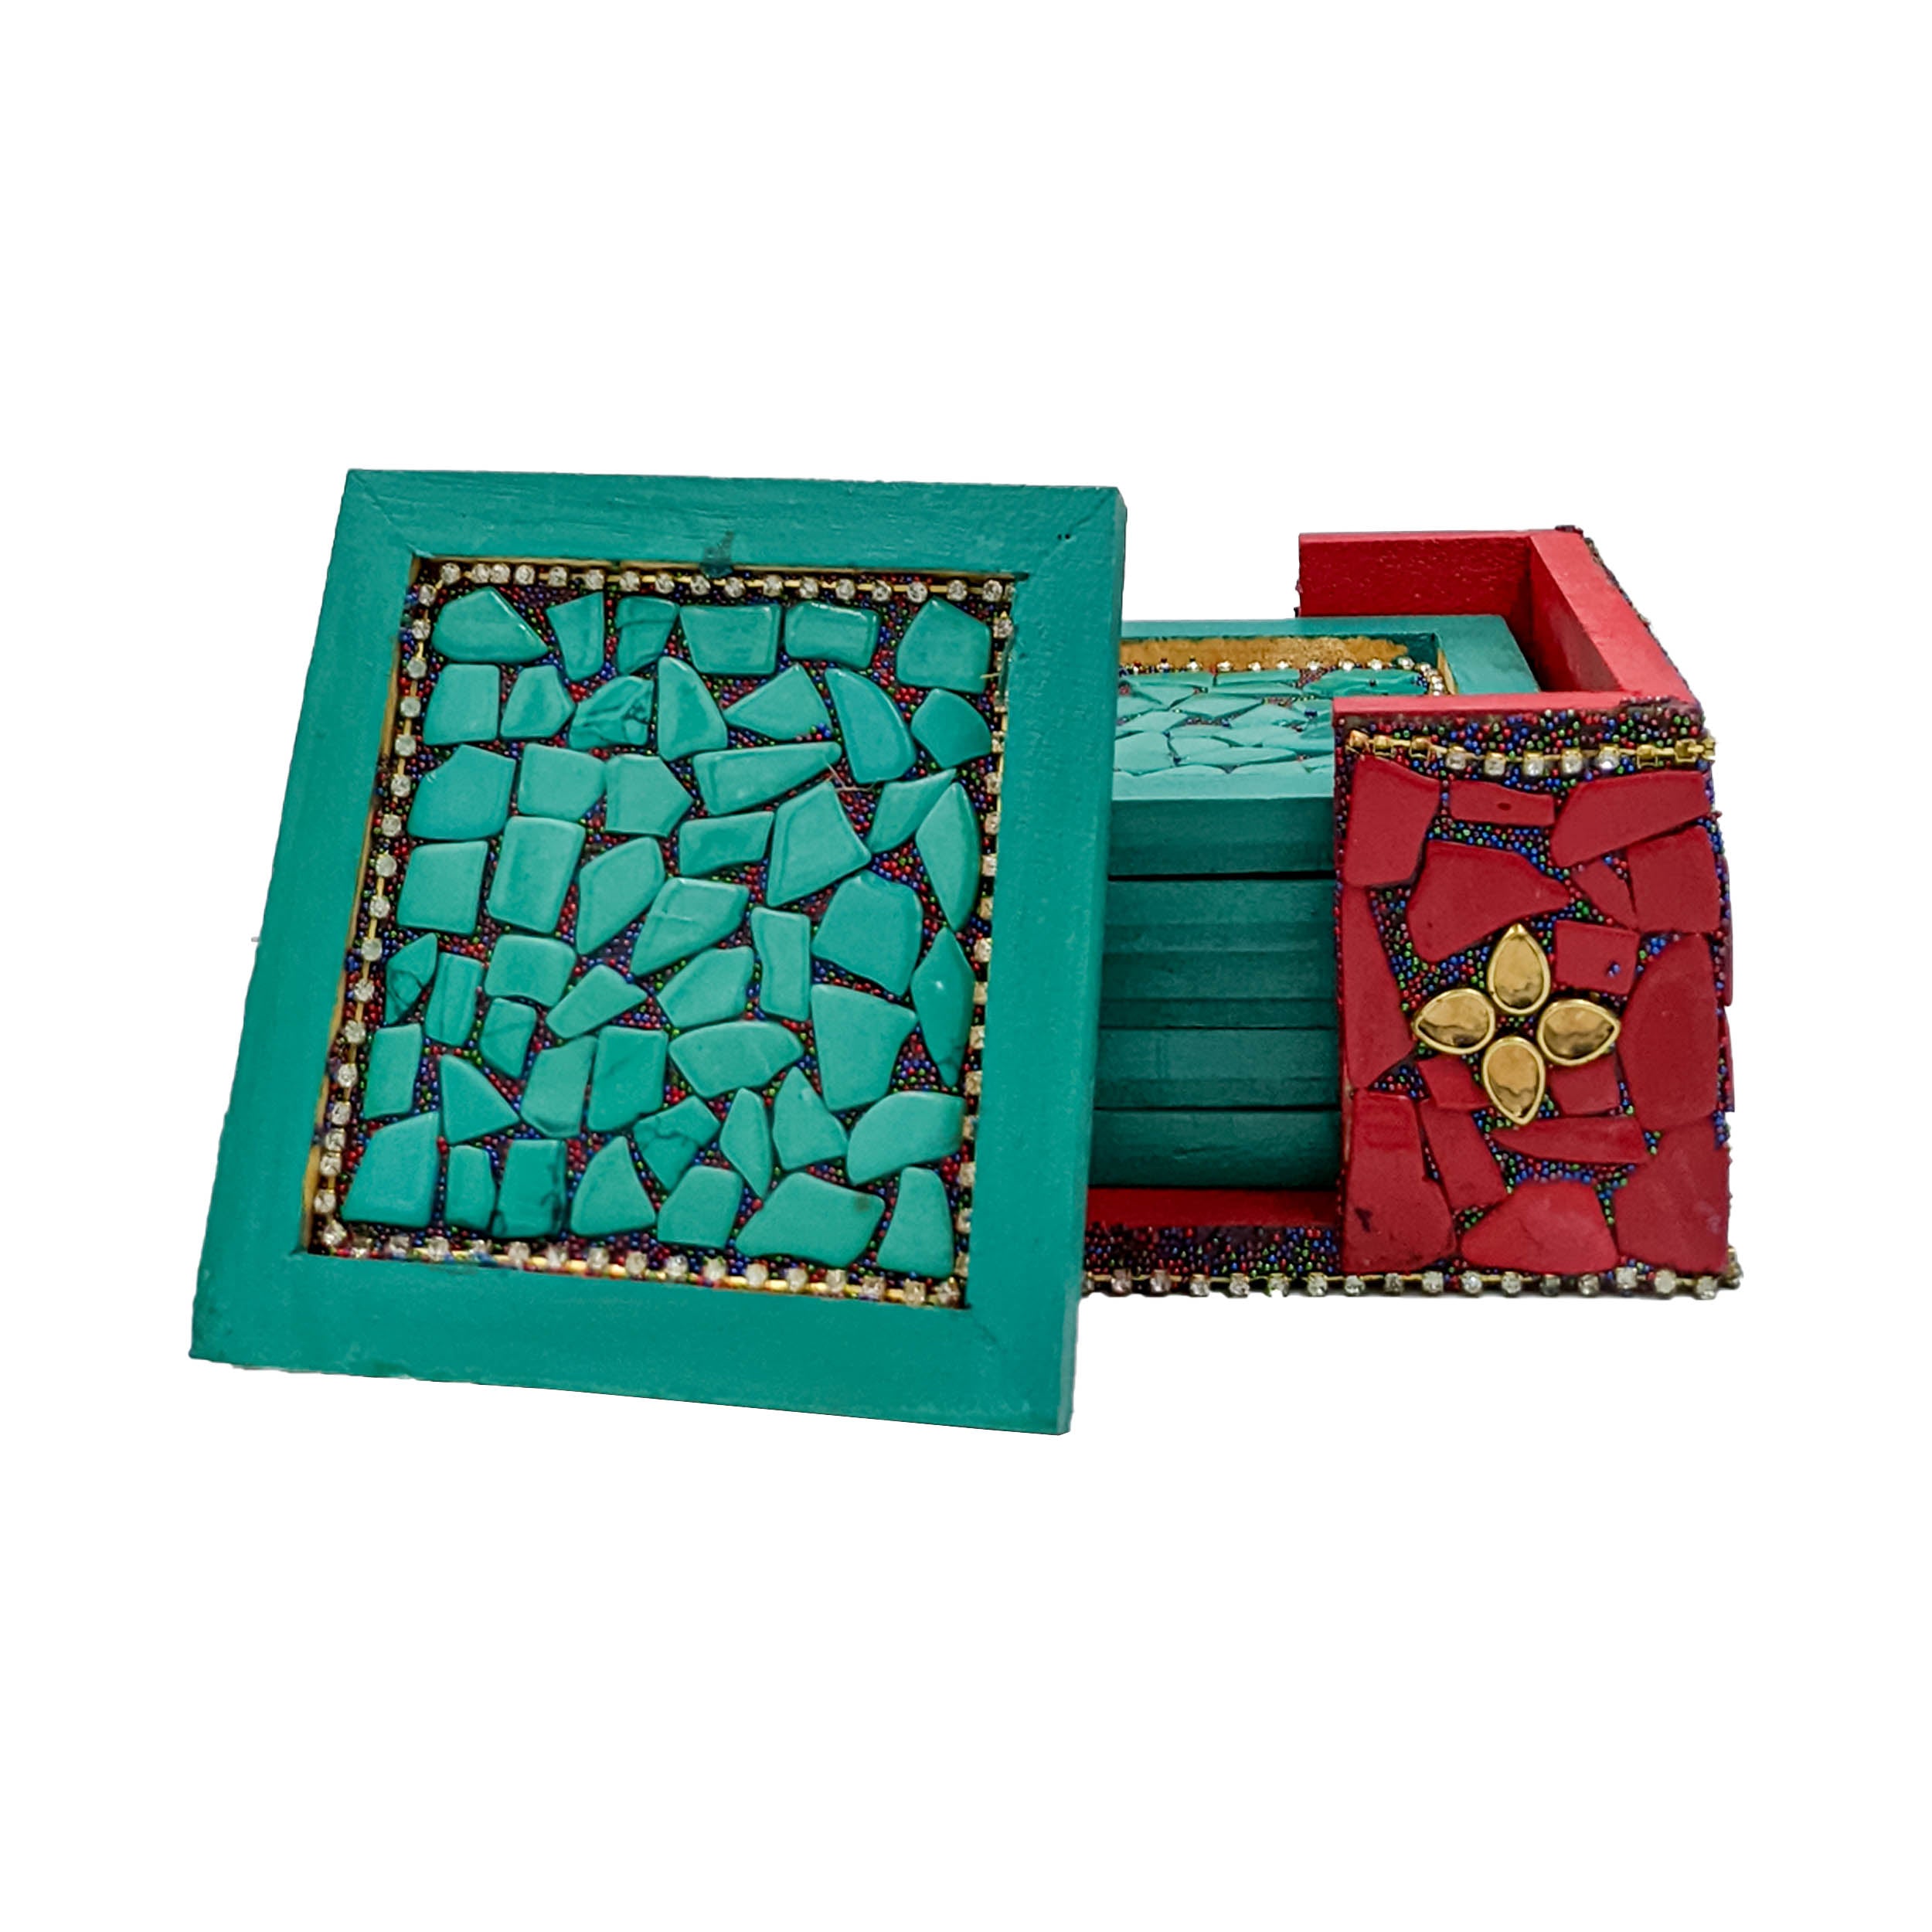 Protect Your Furniture in Style with Handcrafted Wooden Stone Painted Design Tea & Coffee Coasters